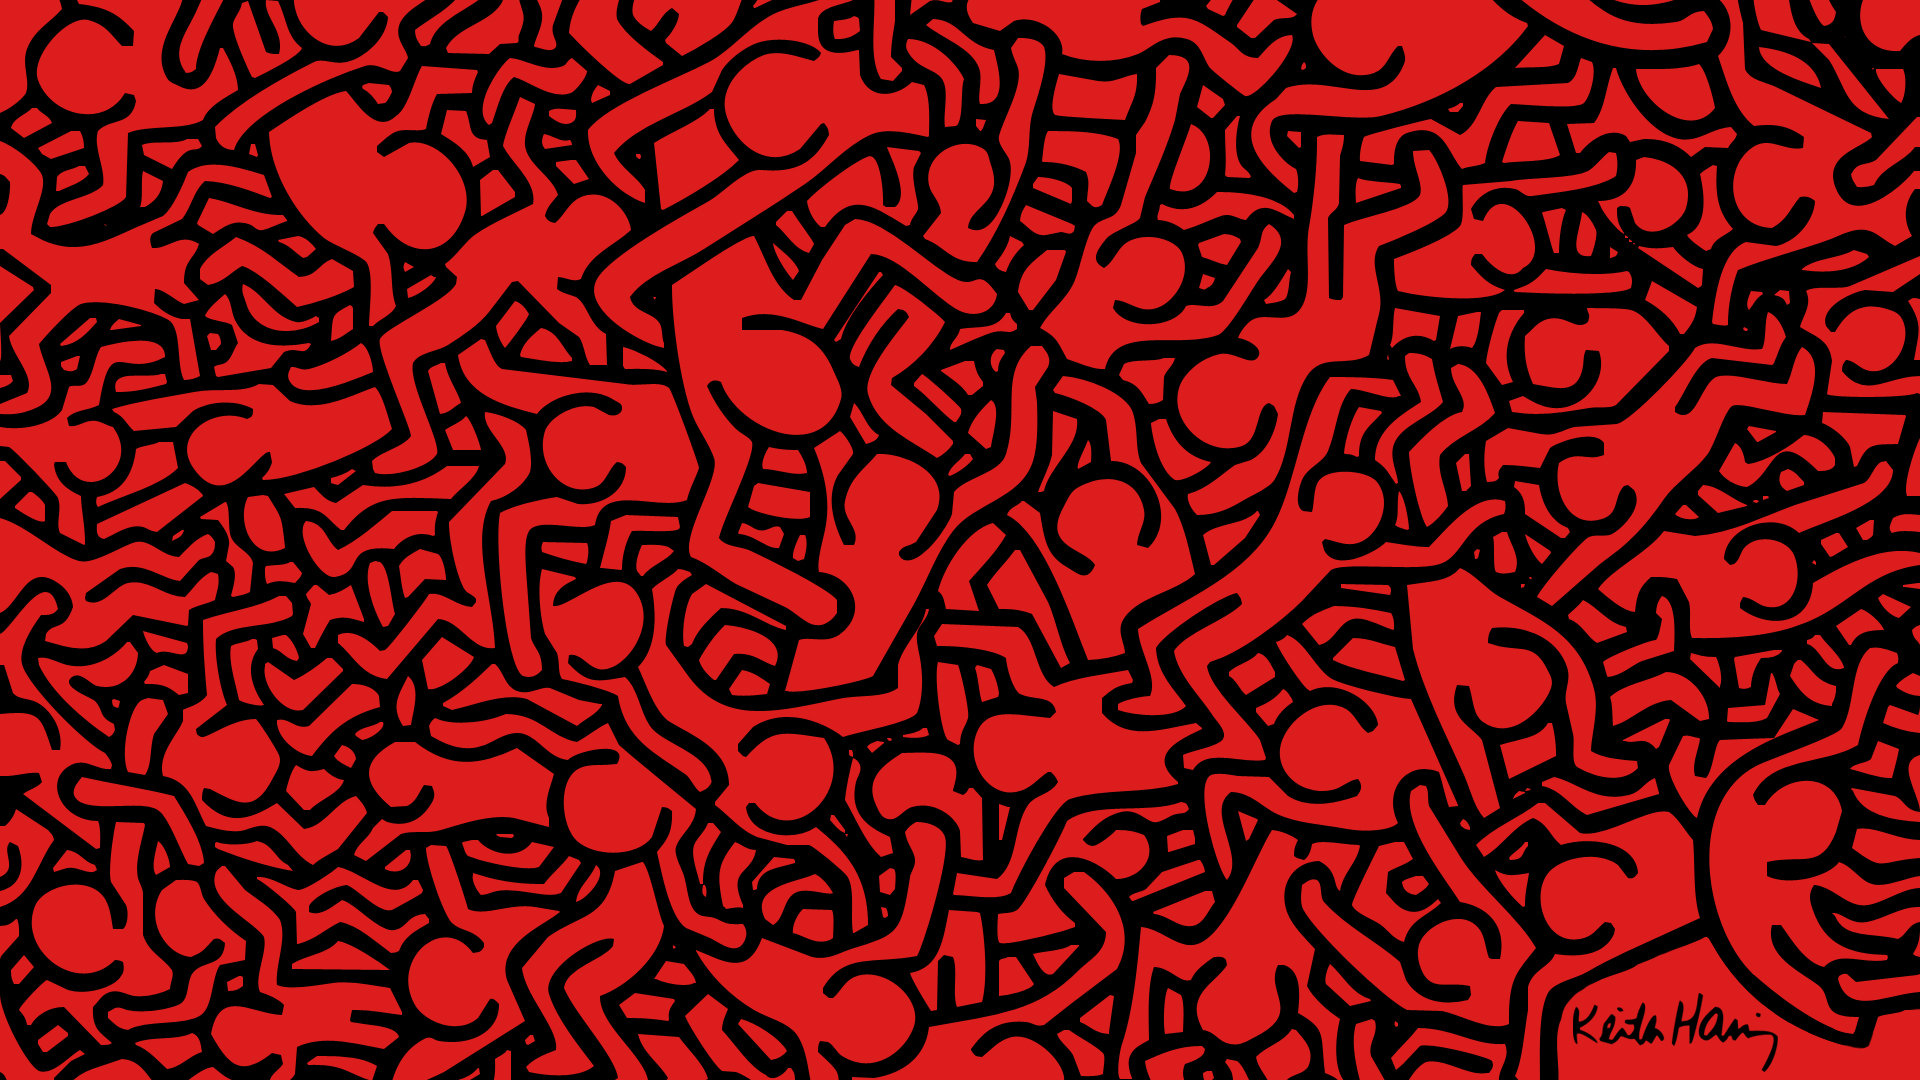 REFERENCES | KEITH HARING | Cozmicflight1920 x 1080